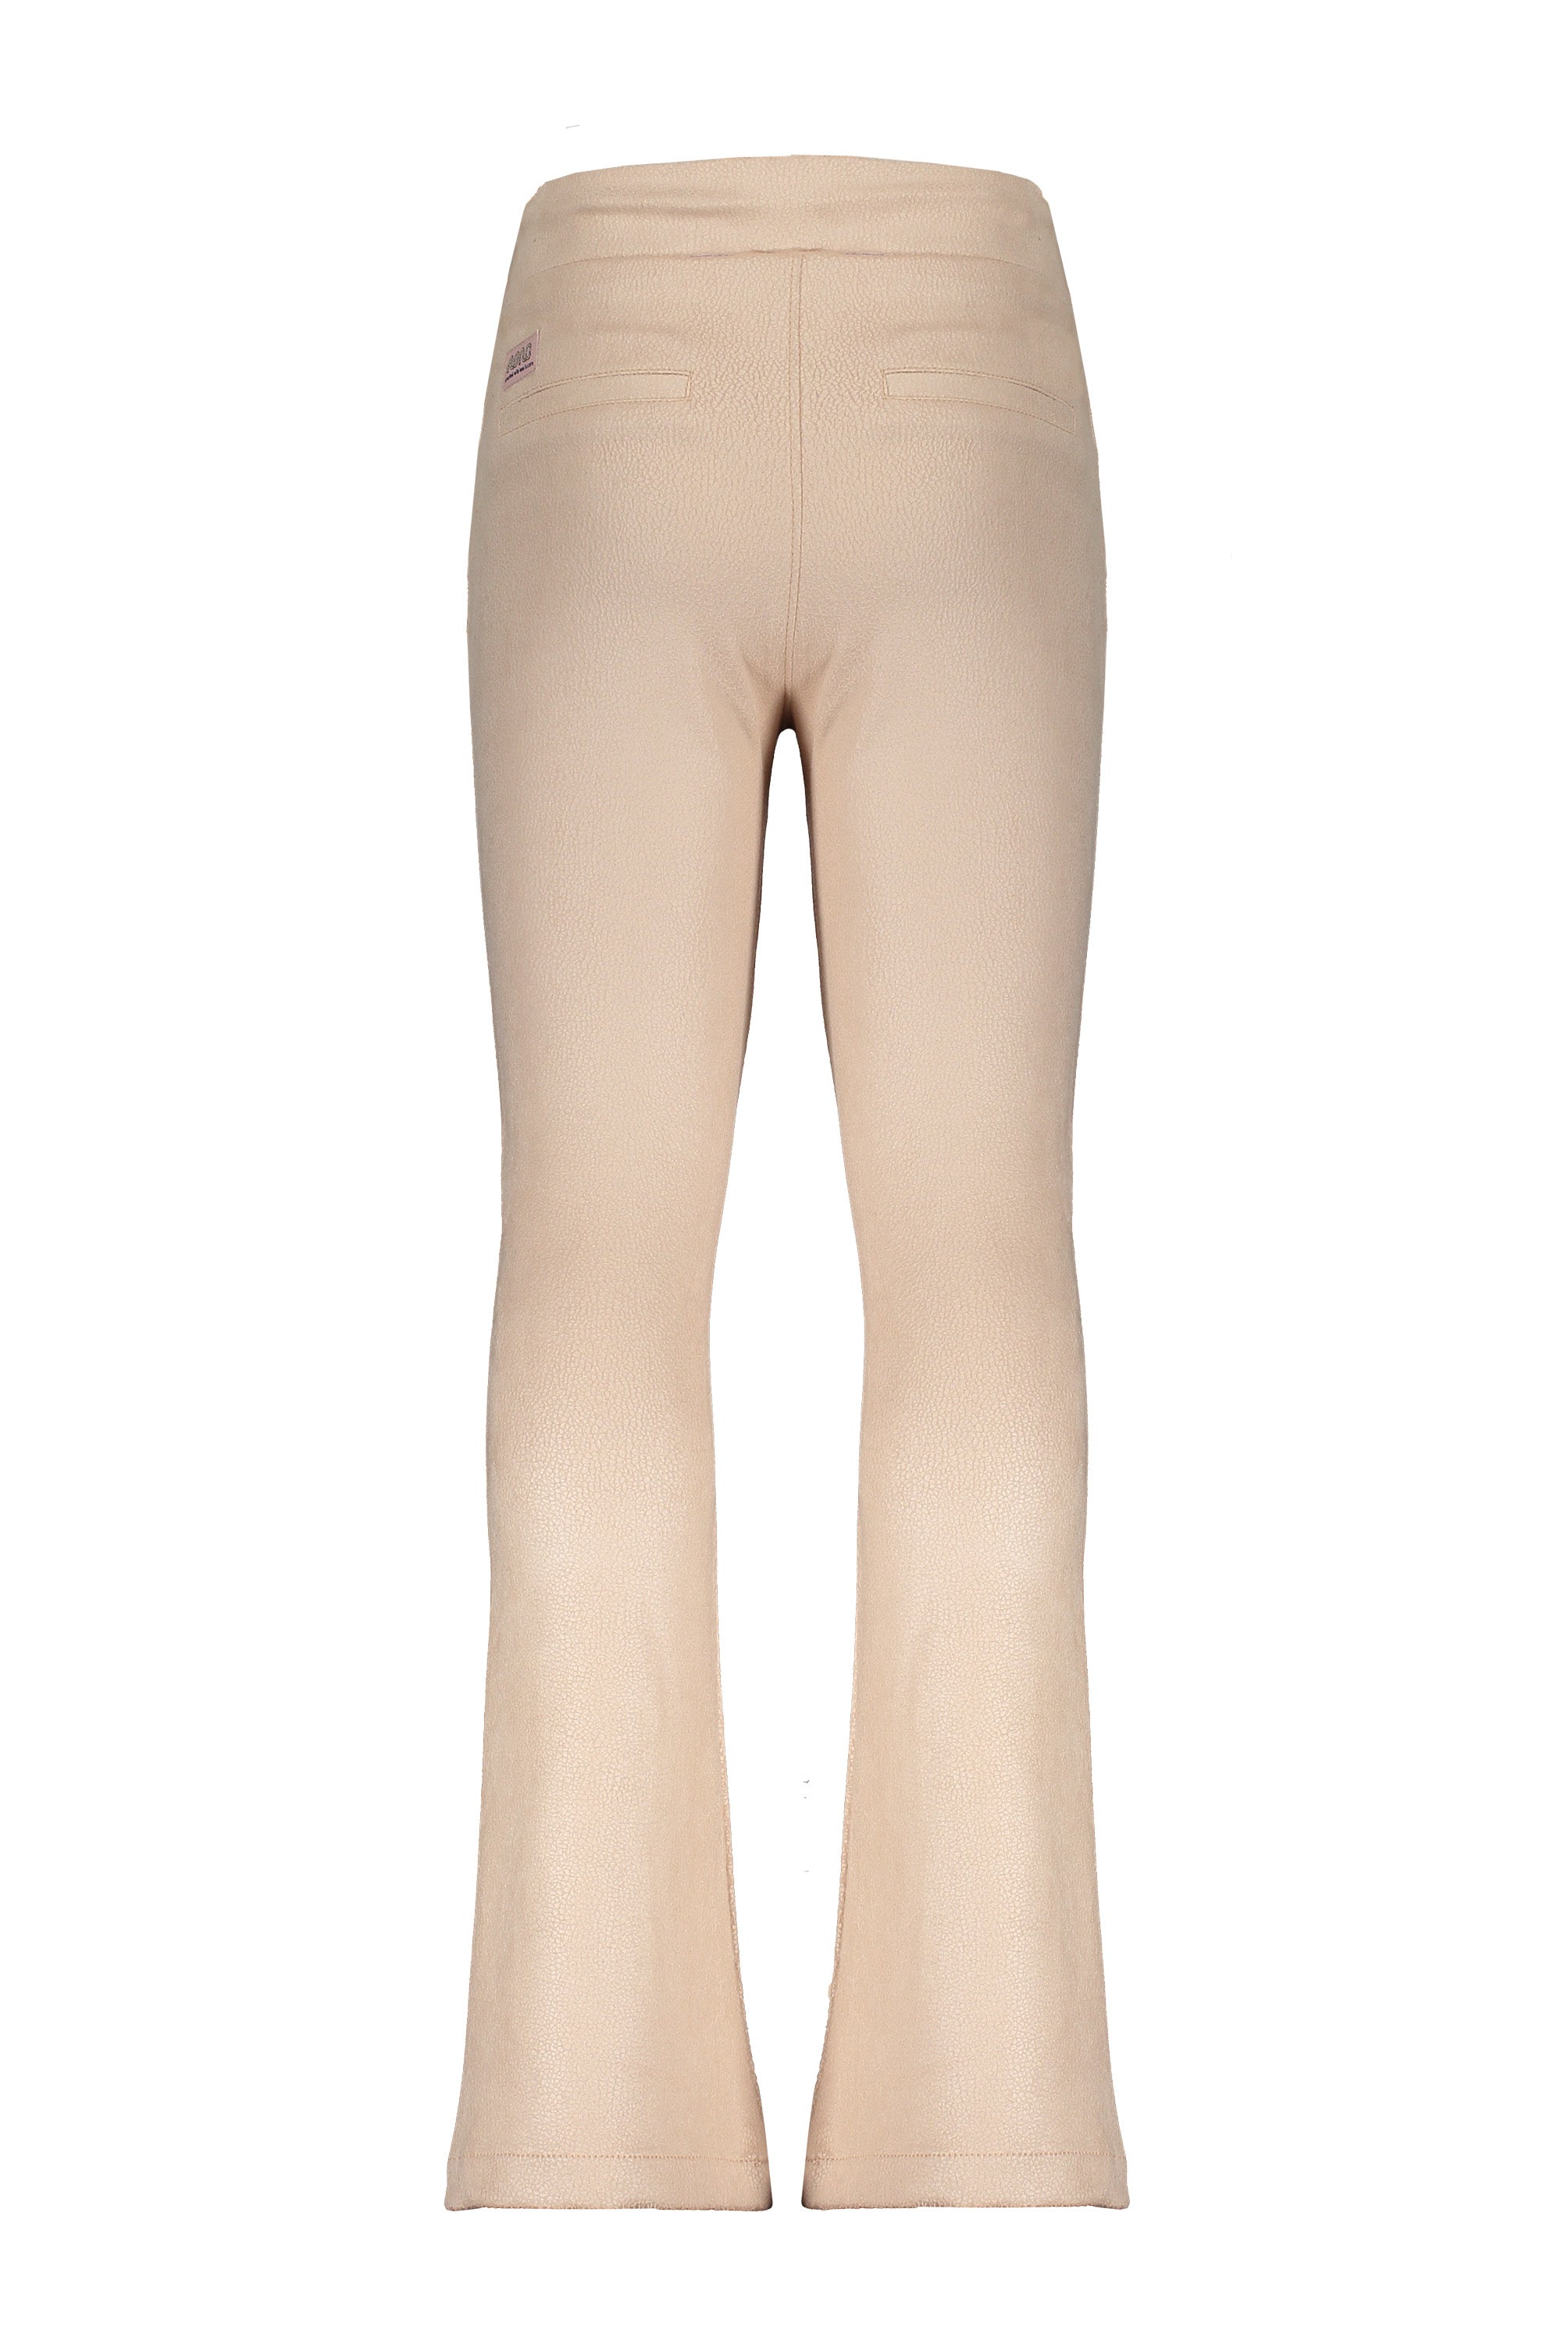 Meisjes Sahara flared pants with cut and sew details at front leg van NoNo in de kleur Rosy Sand in maat 146/152.